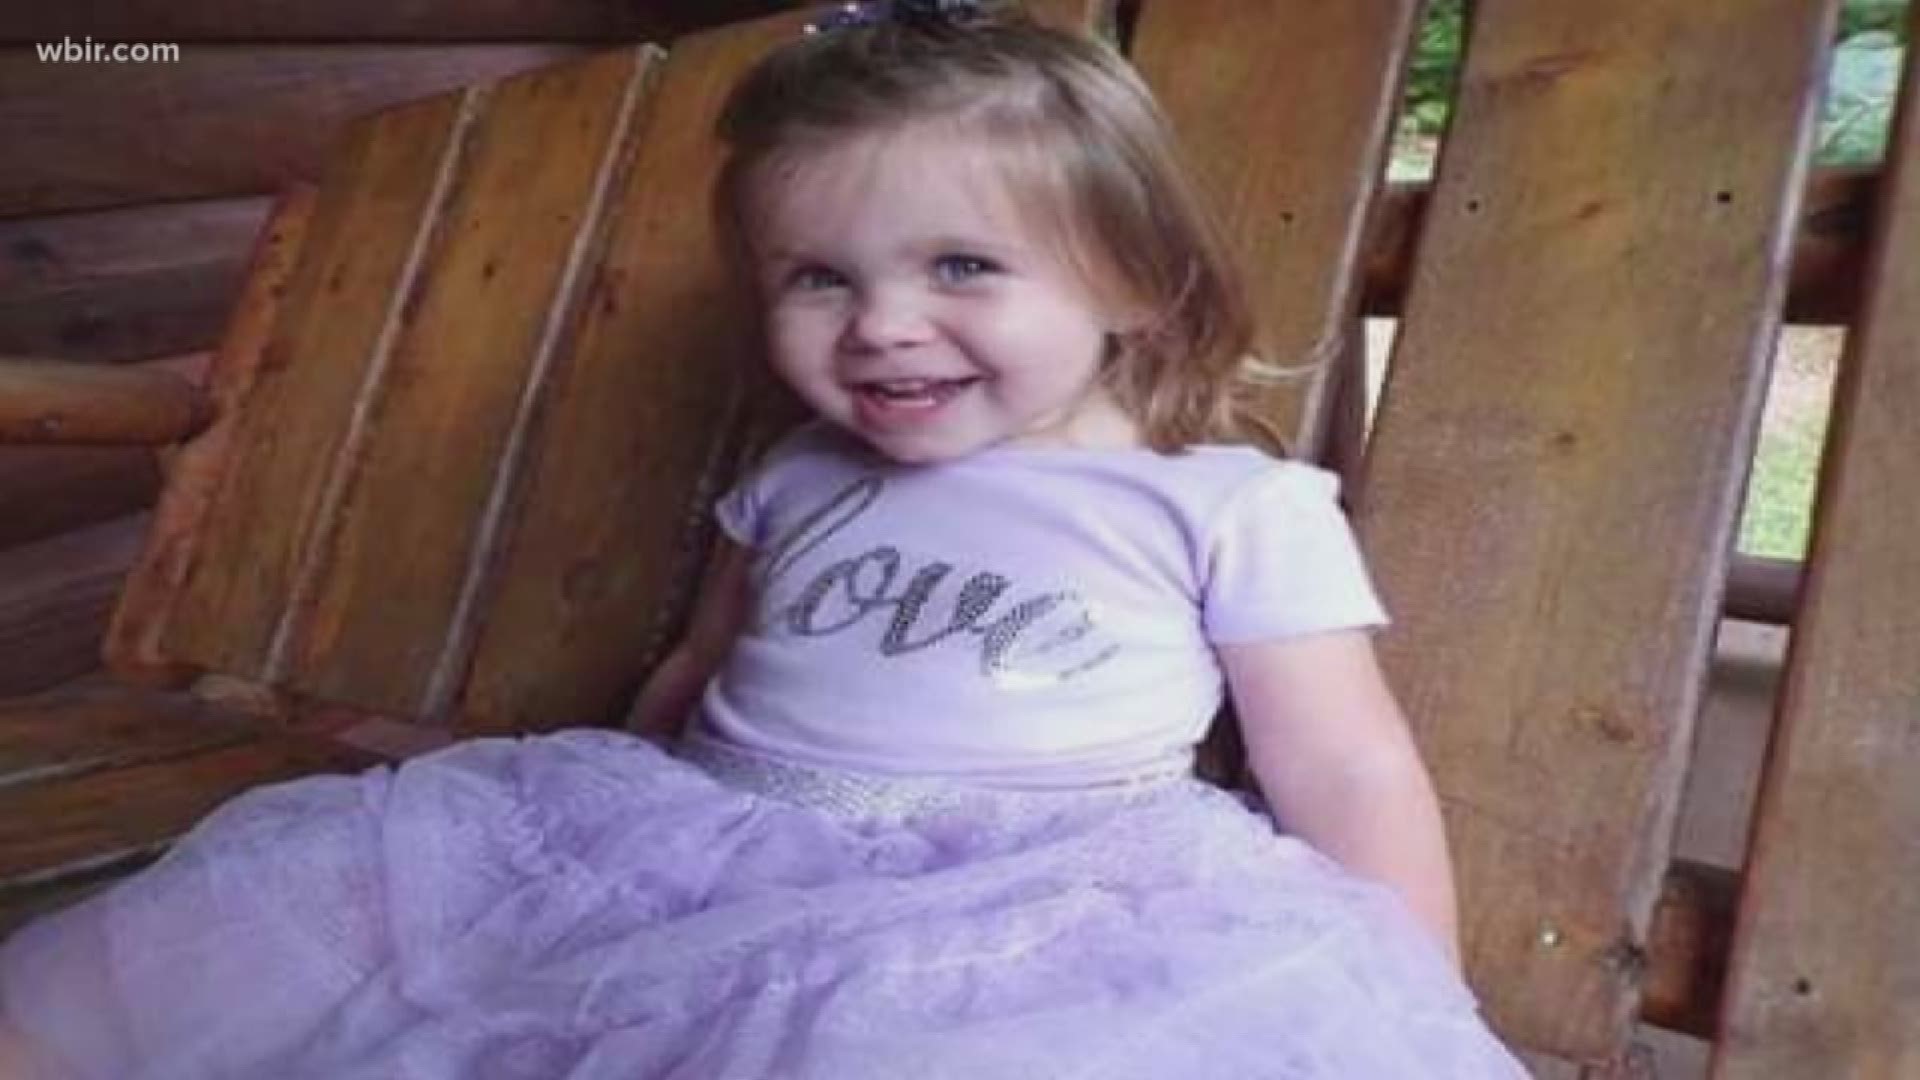 A two-year-old girl is fighting for her life after being hit in the head by a bullet in Johnson County last week. Ariel Salaices is in critical condition at the East Tennessee Children's Hospital, and her mother says she is improving.